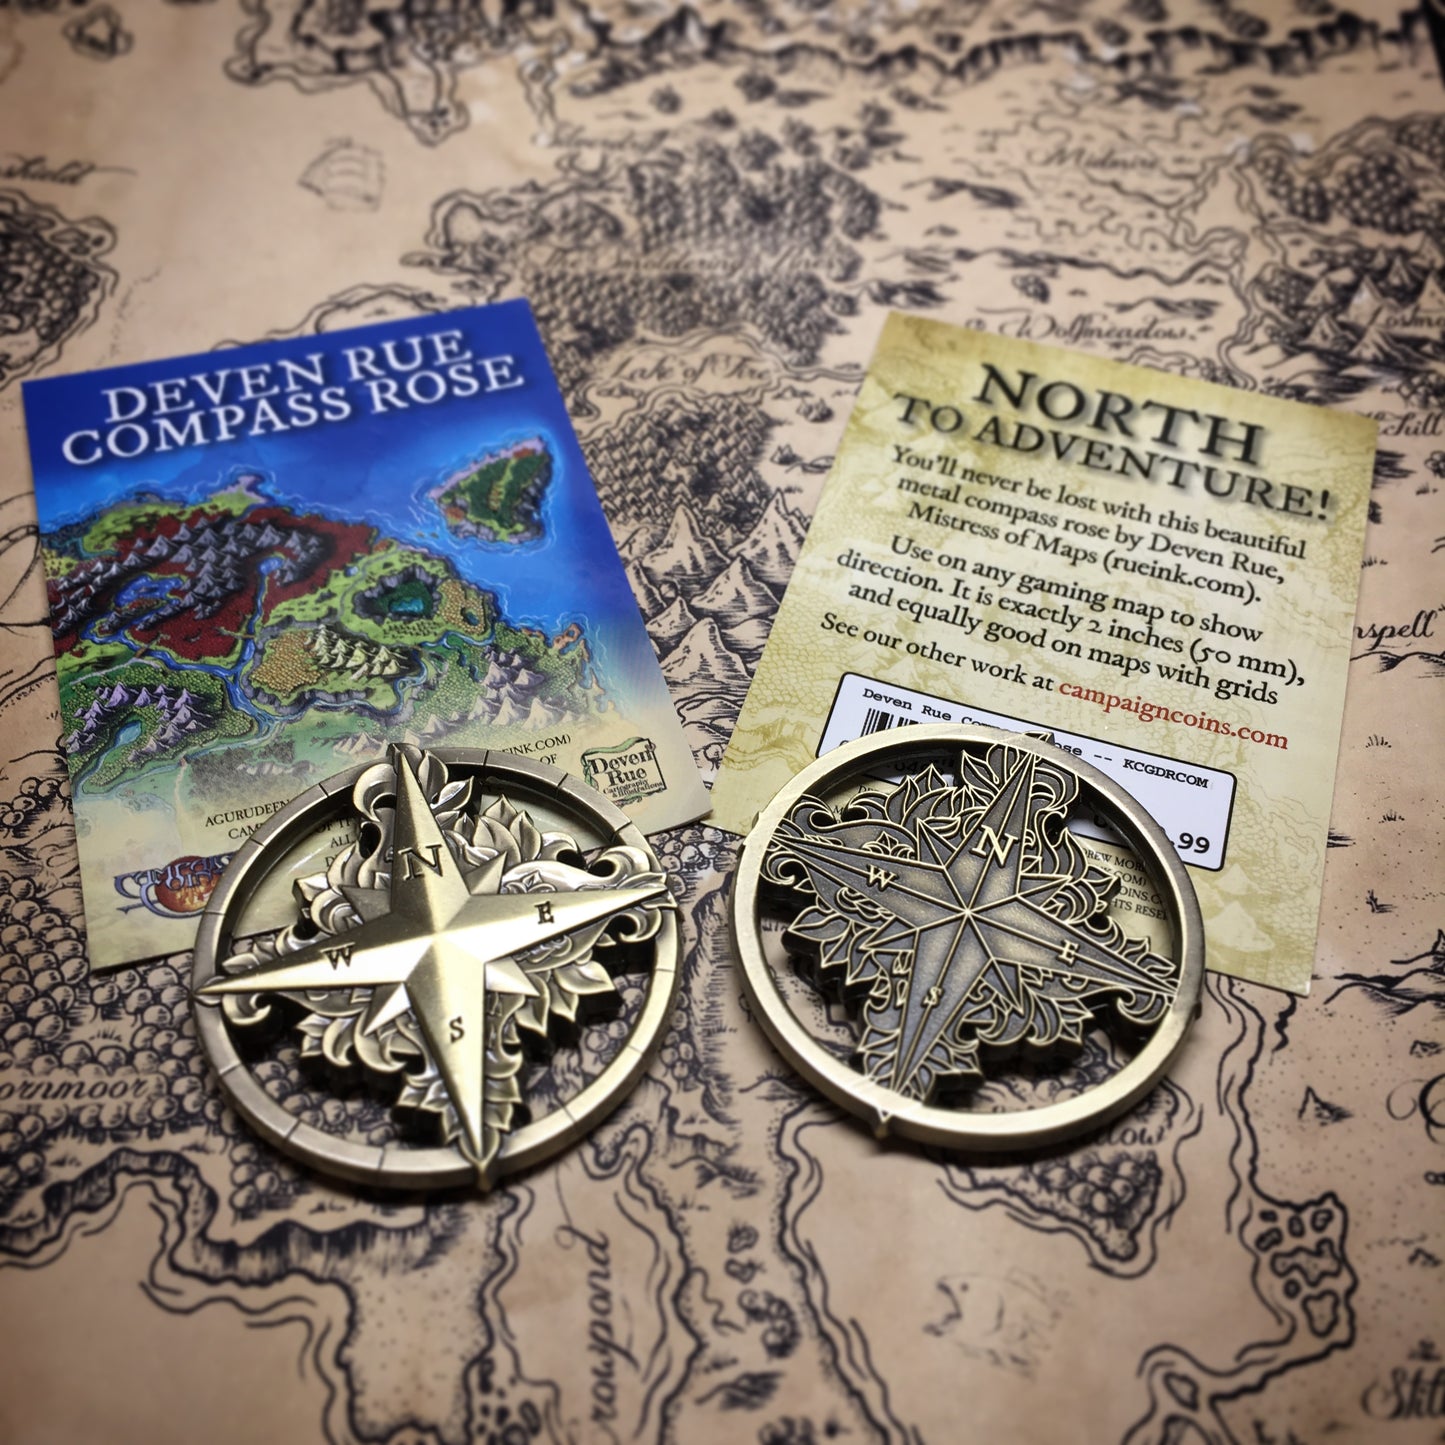 An antique bronze tone compass rose with Deven Rue's card.